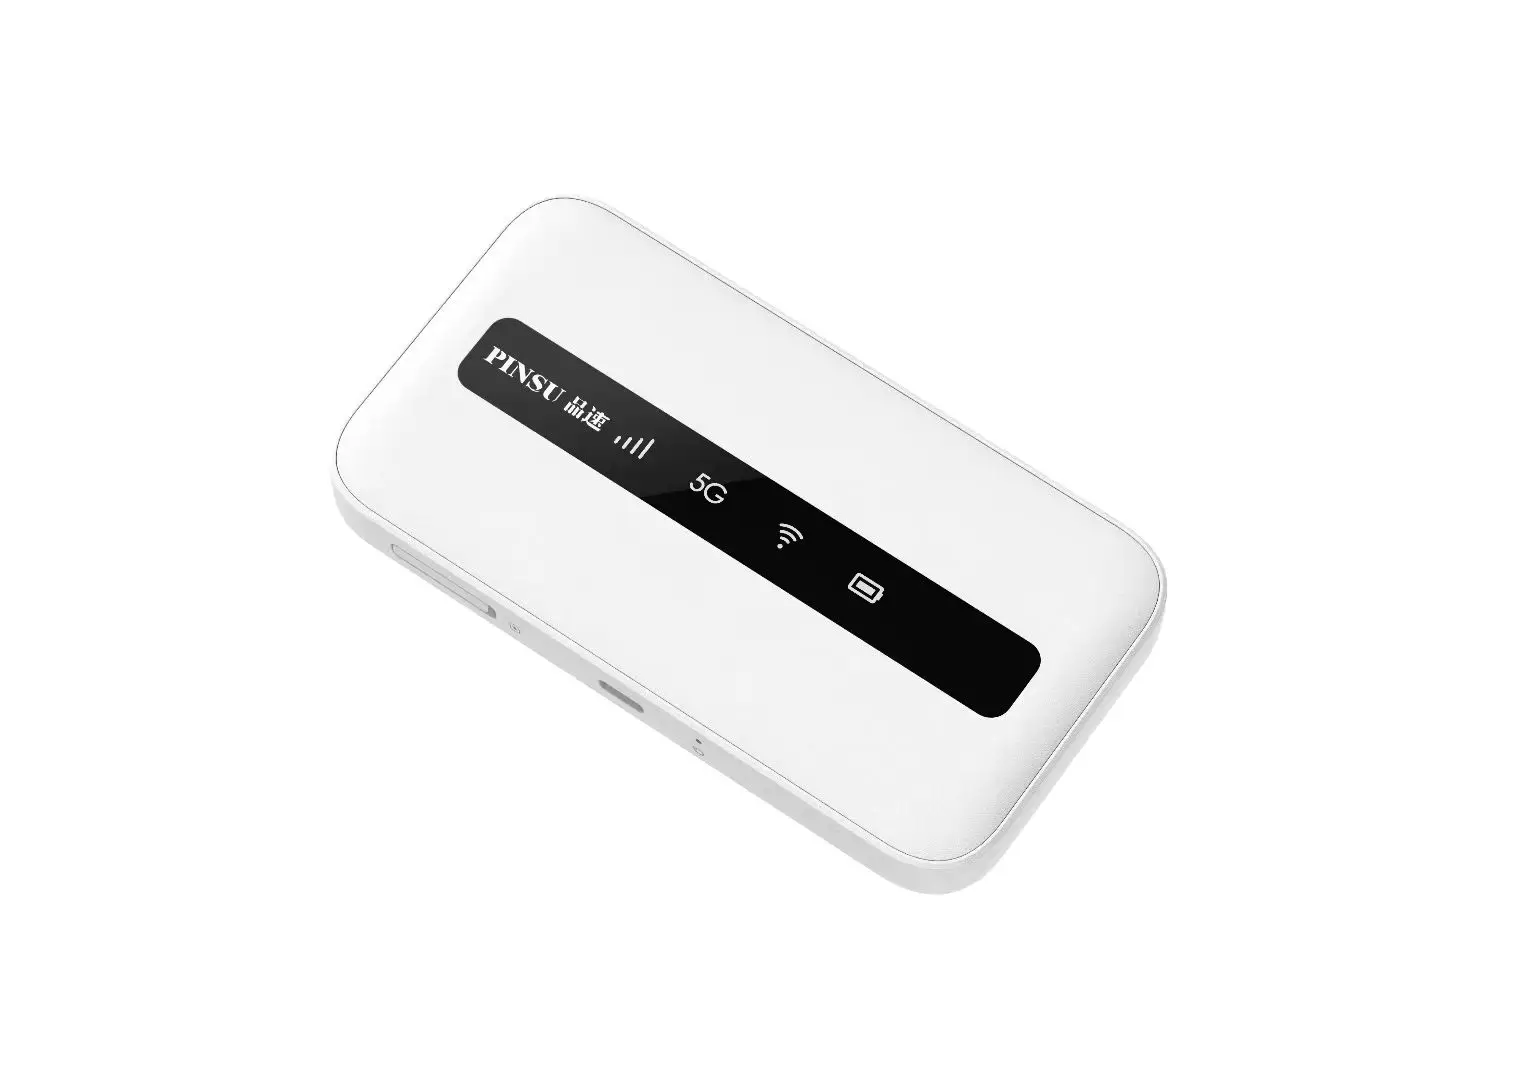 NEW Unlocked PINSU R100 5G WiFi 6 router NSA+SA mesh wifi 5g router with SIM card Qualcomn SDX55 Sub-6 moden 3600 mAh battery images - 6